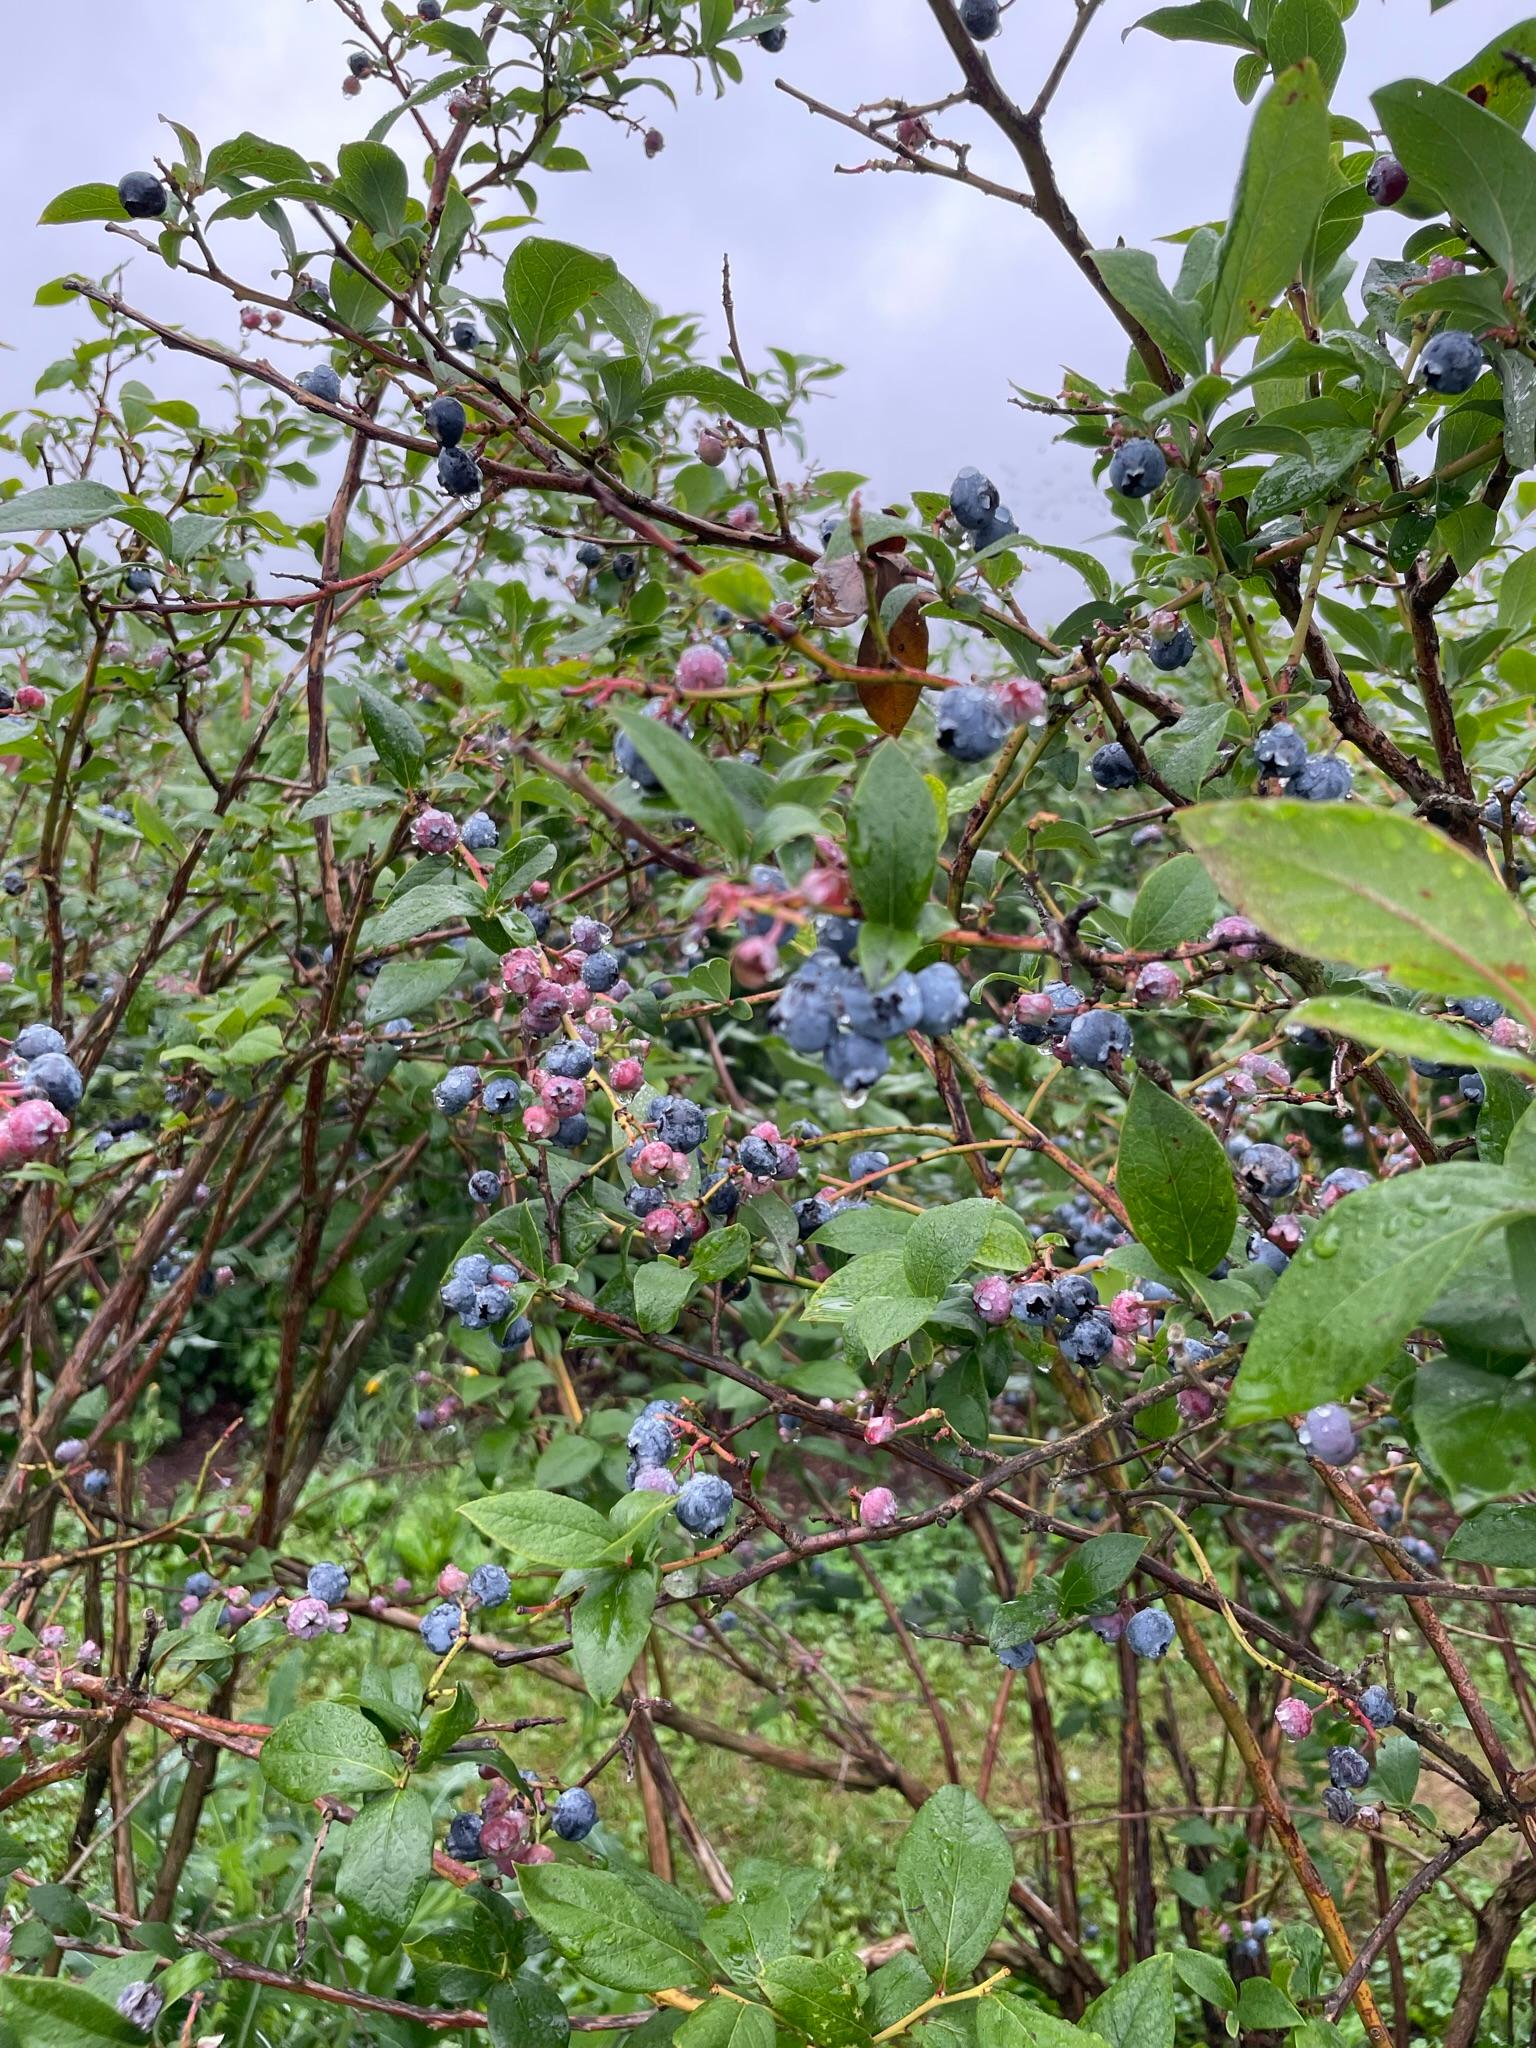 Blueberries ready to be harvested from a blueberry bush.